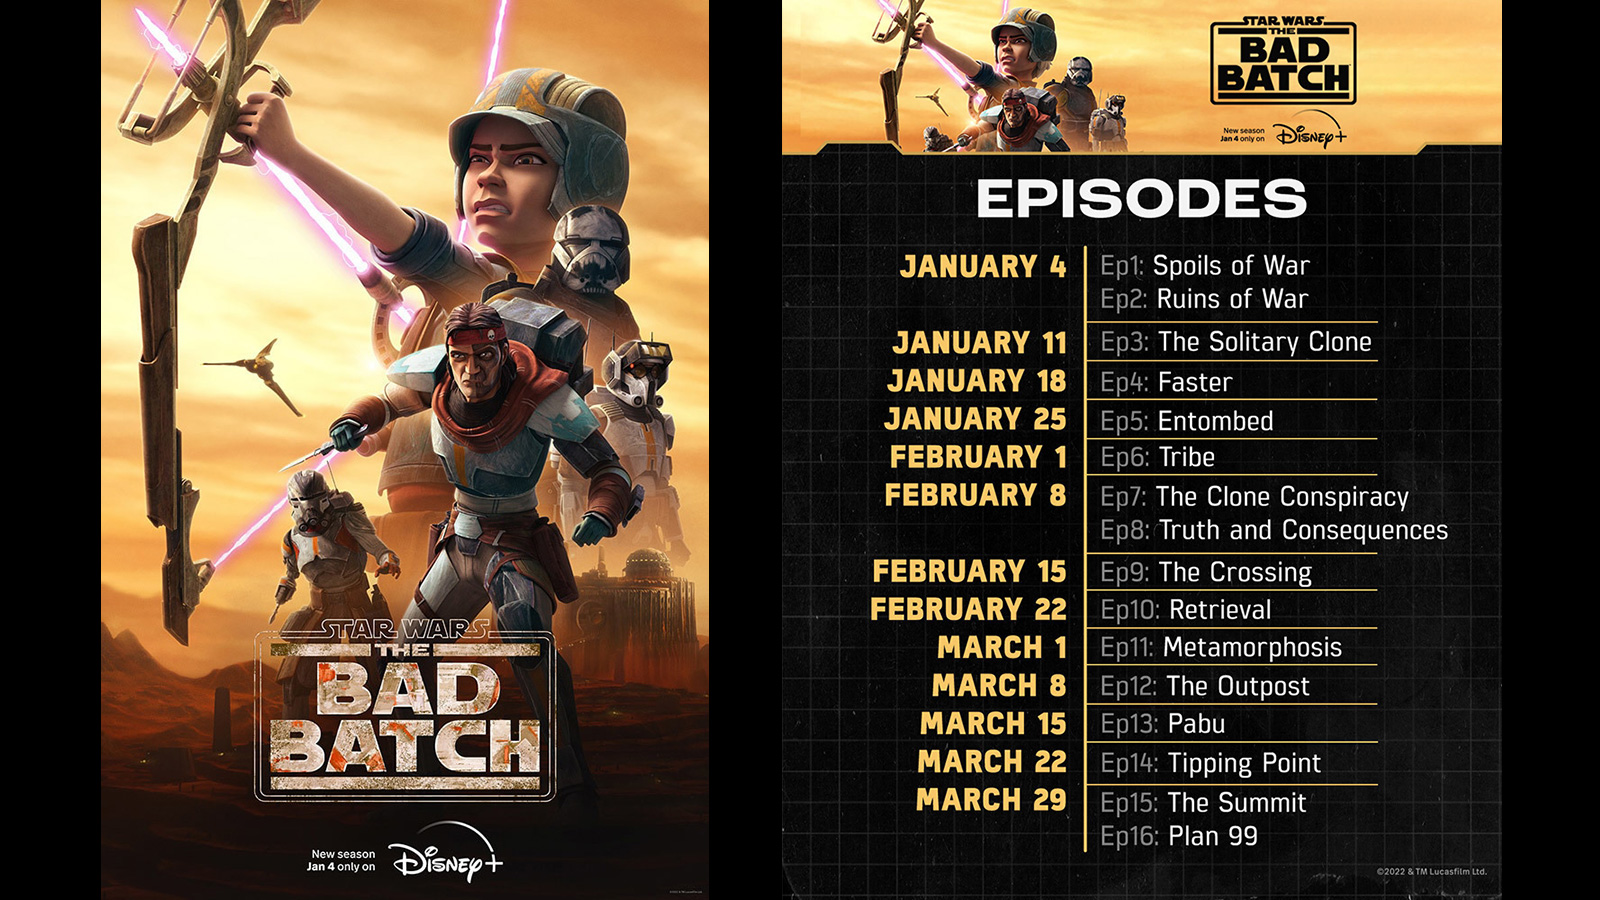 The Bad Batch Season 2 Schedule - Streaming Starts January 4th 2023